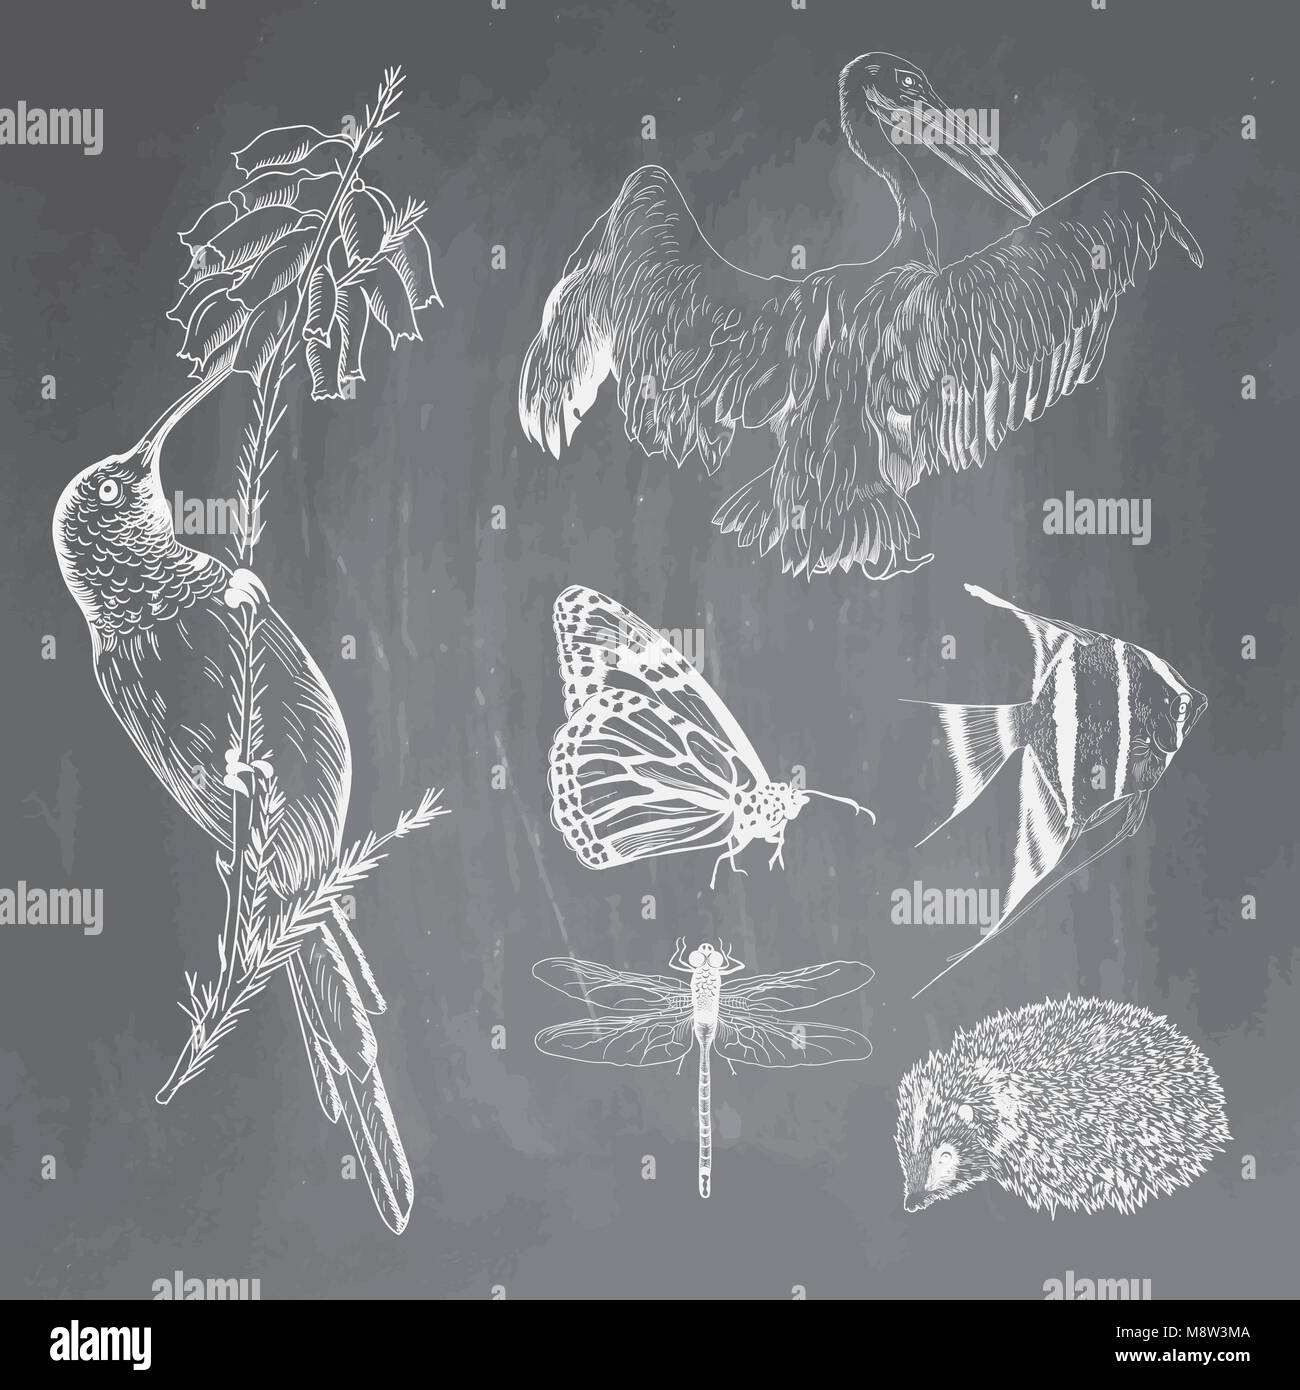 Set of animals on chalkboard background. Colibri, pelican, butterfly, fish, hedgehog, dragonfly sketches. Vector illustration isolated on blackboard imitation. Collection for school and printing. Stock Vector